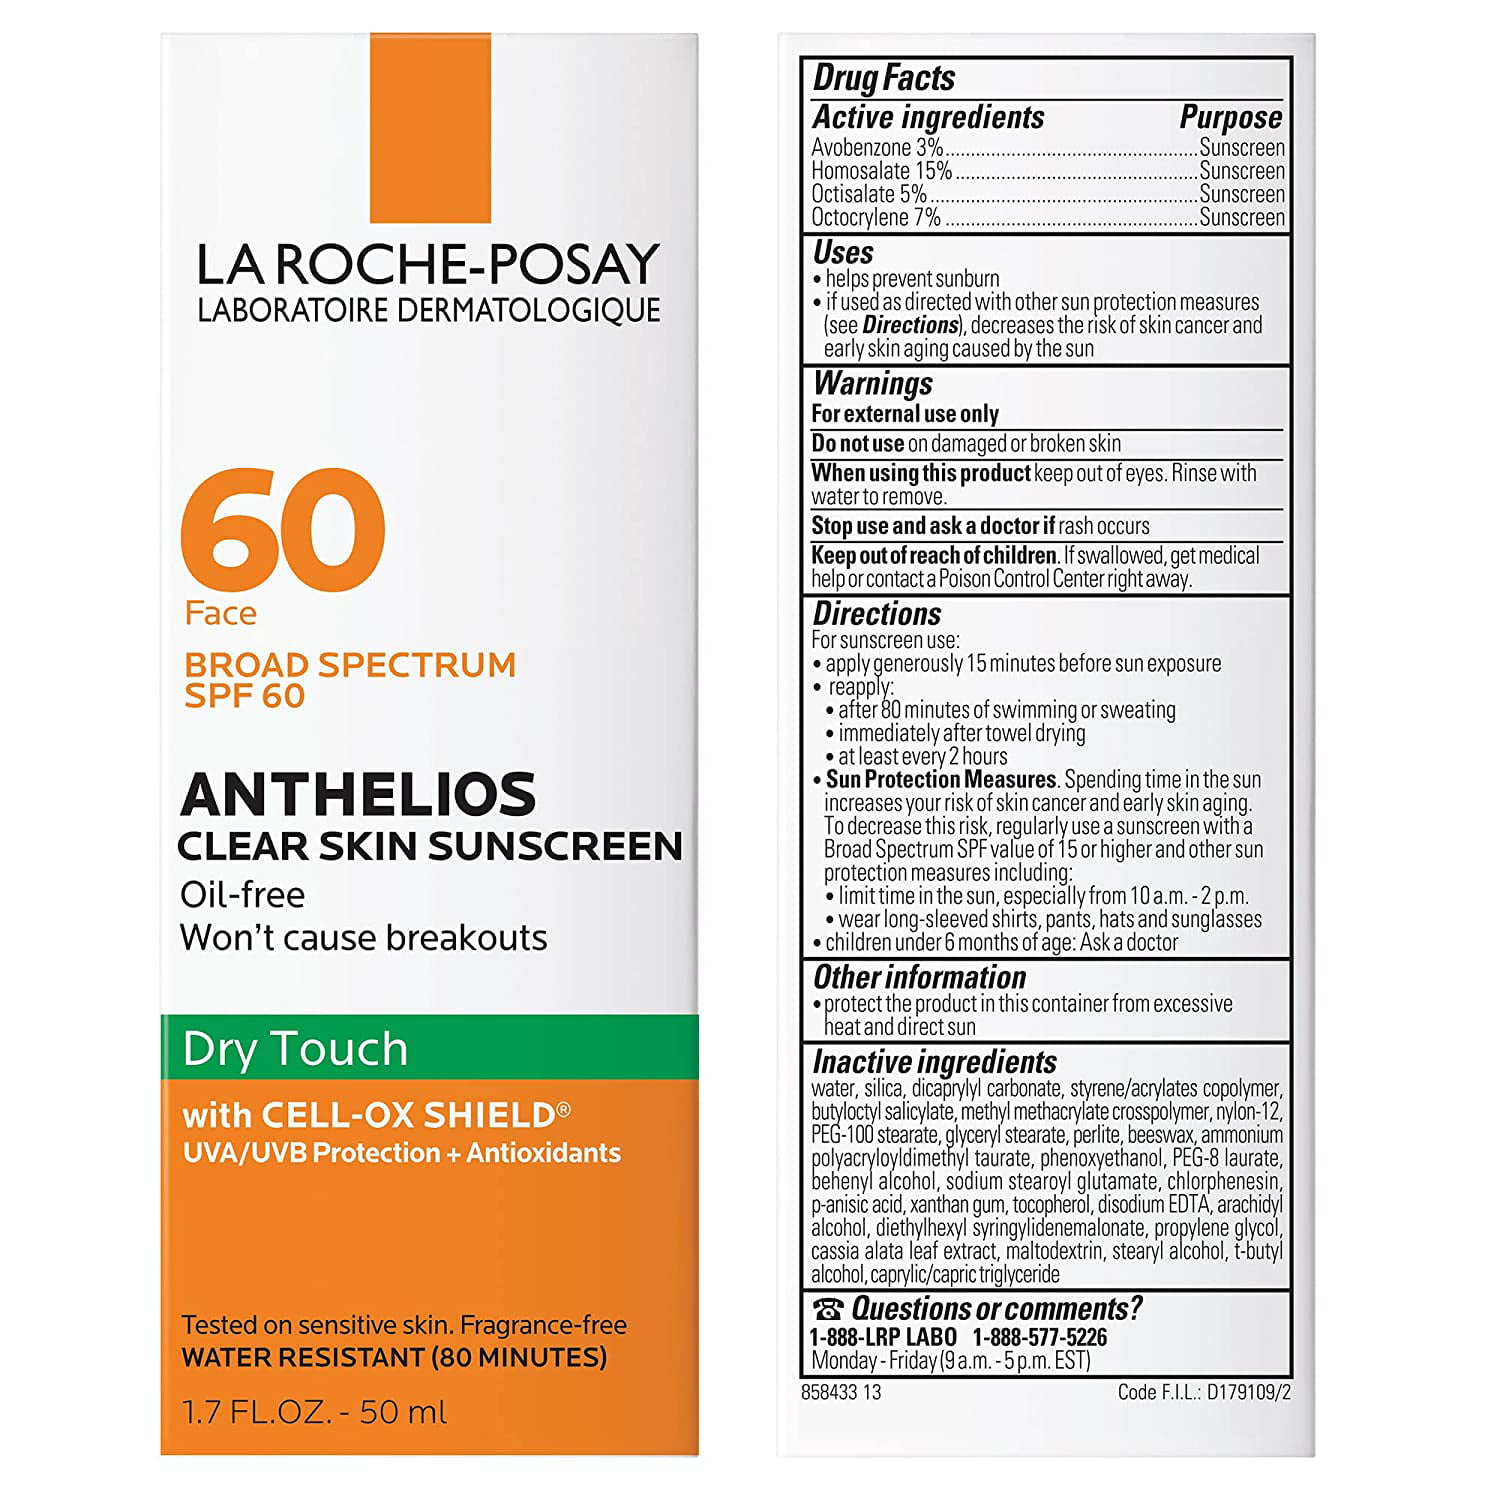 udstilling at tiltrække magi La Roche-Posay Anthelios Clear Skin Dry Touch Sunscreen SPF 60, Oil Free  Face Sunscreen for Acne Prone Skin, Won't Cause Breakouts, Non-Greasy,  Oxybenzone Free - Walmart.com